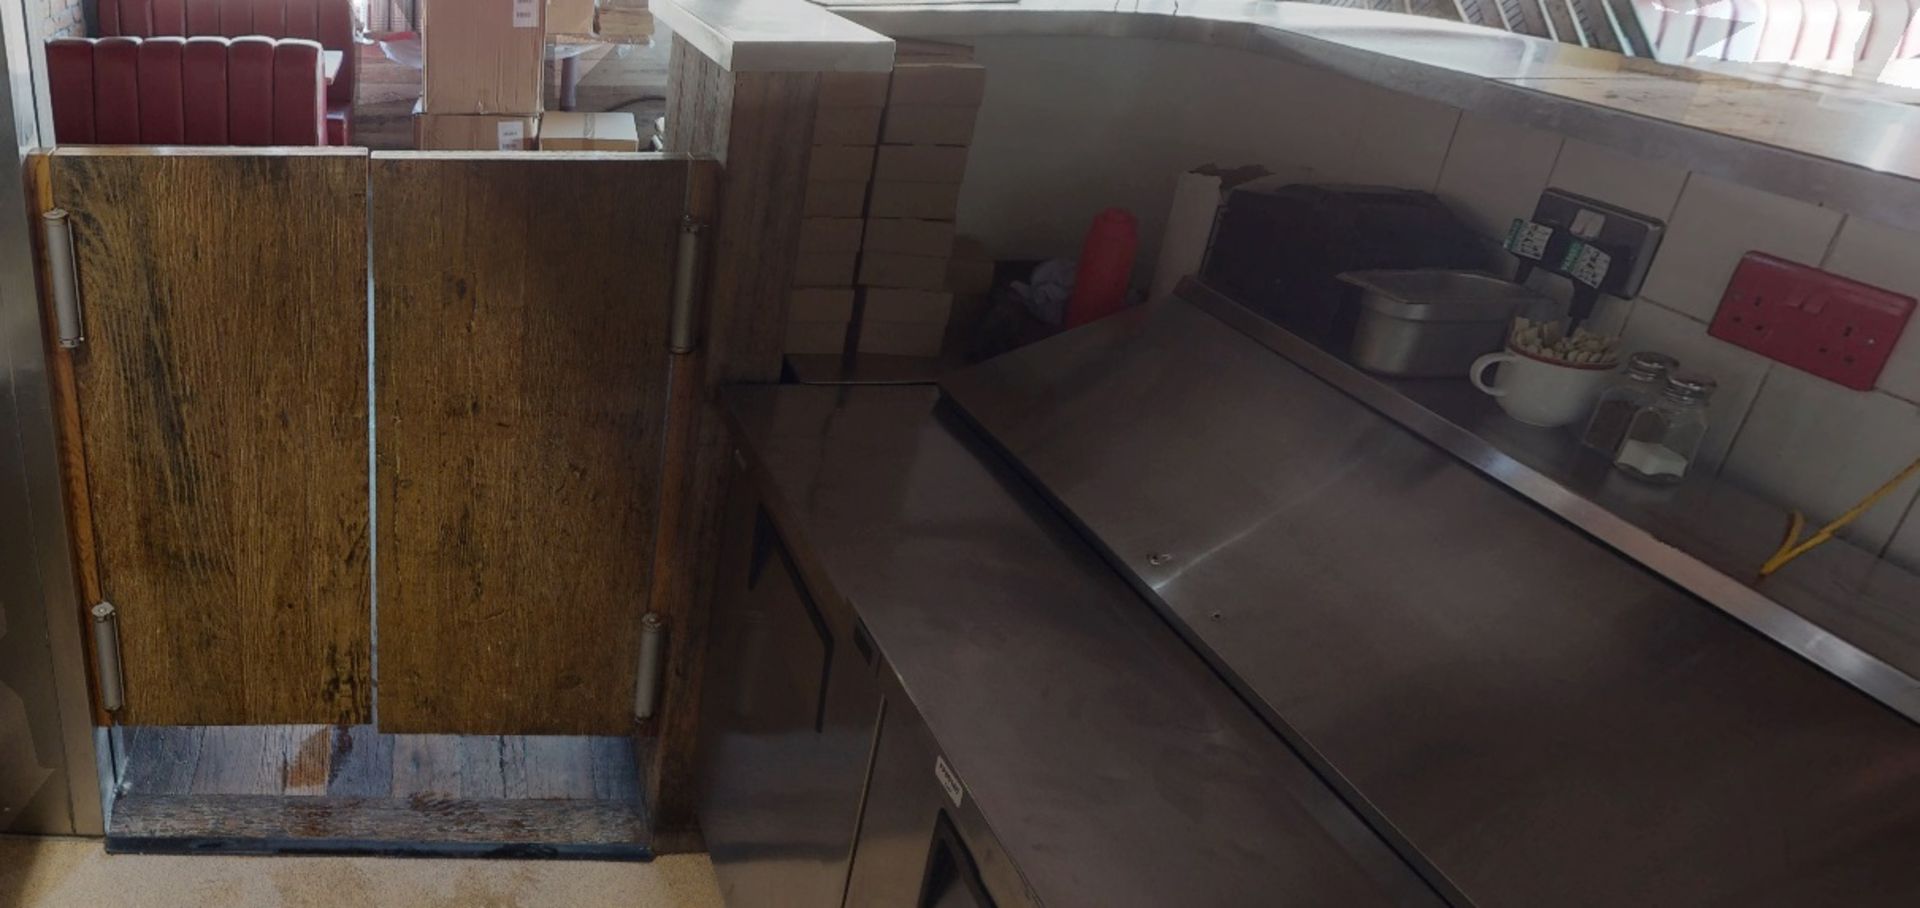 1 x Steel Topped Restaurant Pass Counter With A Pair Of Swinging Doors - Approx 3.5 Metres Wide - Image 4 of 4